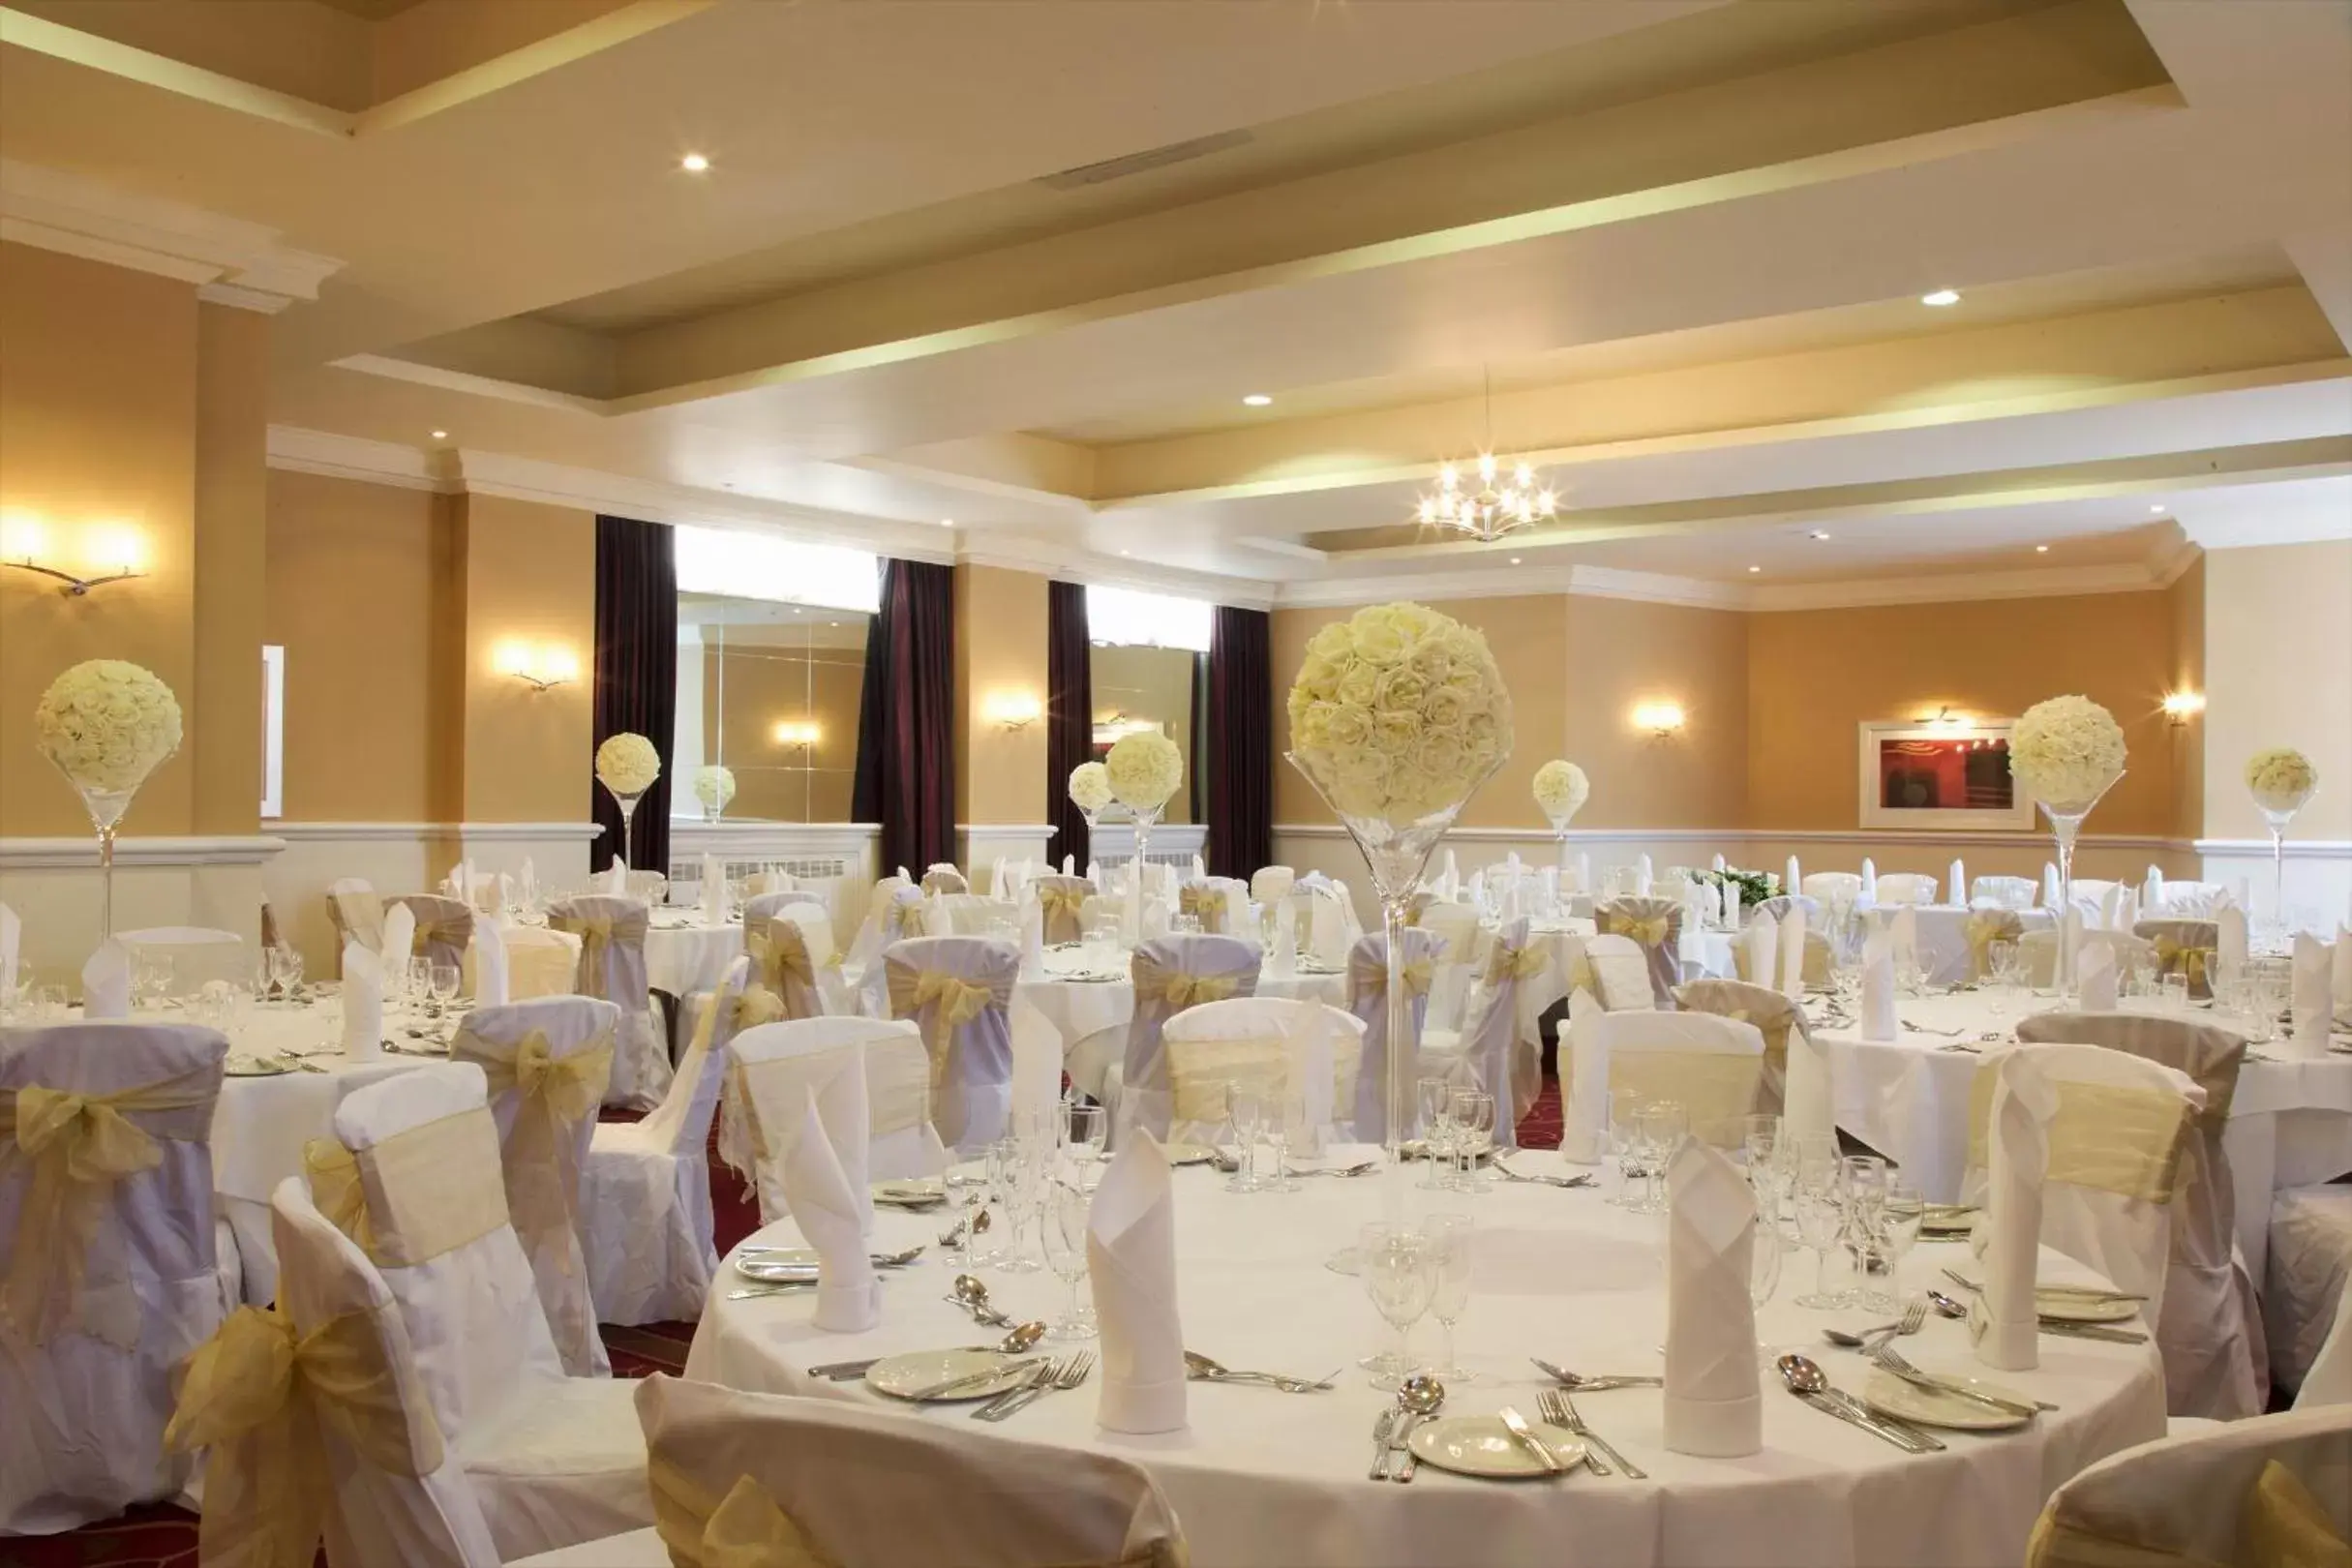 Banquet/Function facilities, Banquet Facilities in Bournemouth Carlton Hotel, BW Signature Collection